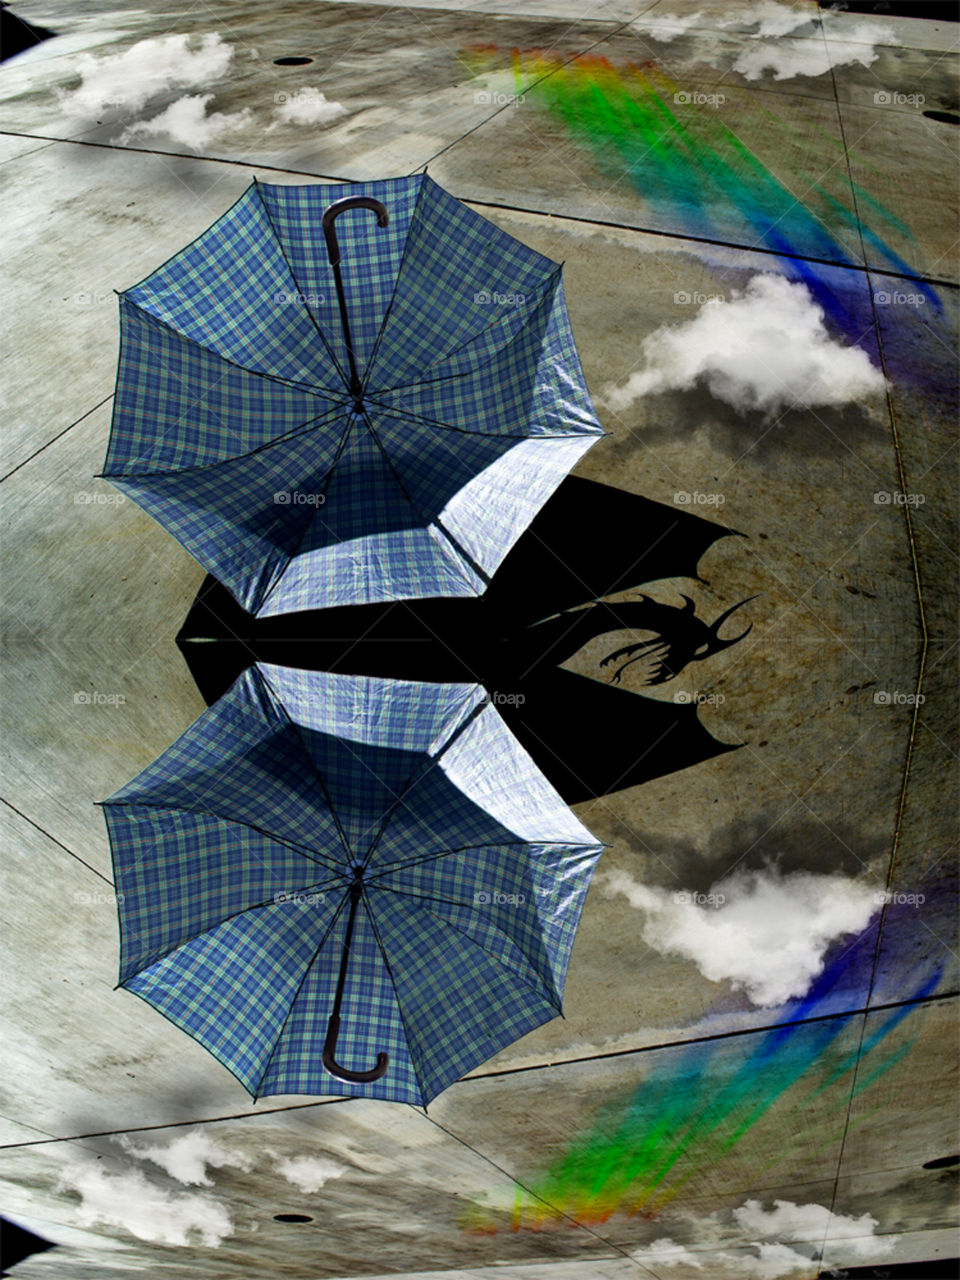 Twin Umbrellas. A reflective photo gives two umbrellas after the rain has passes.